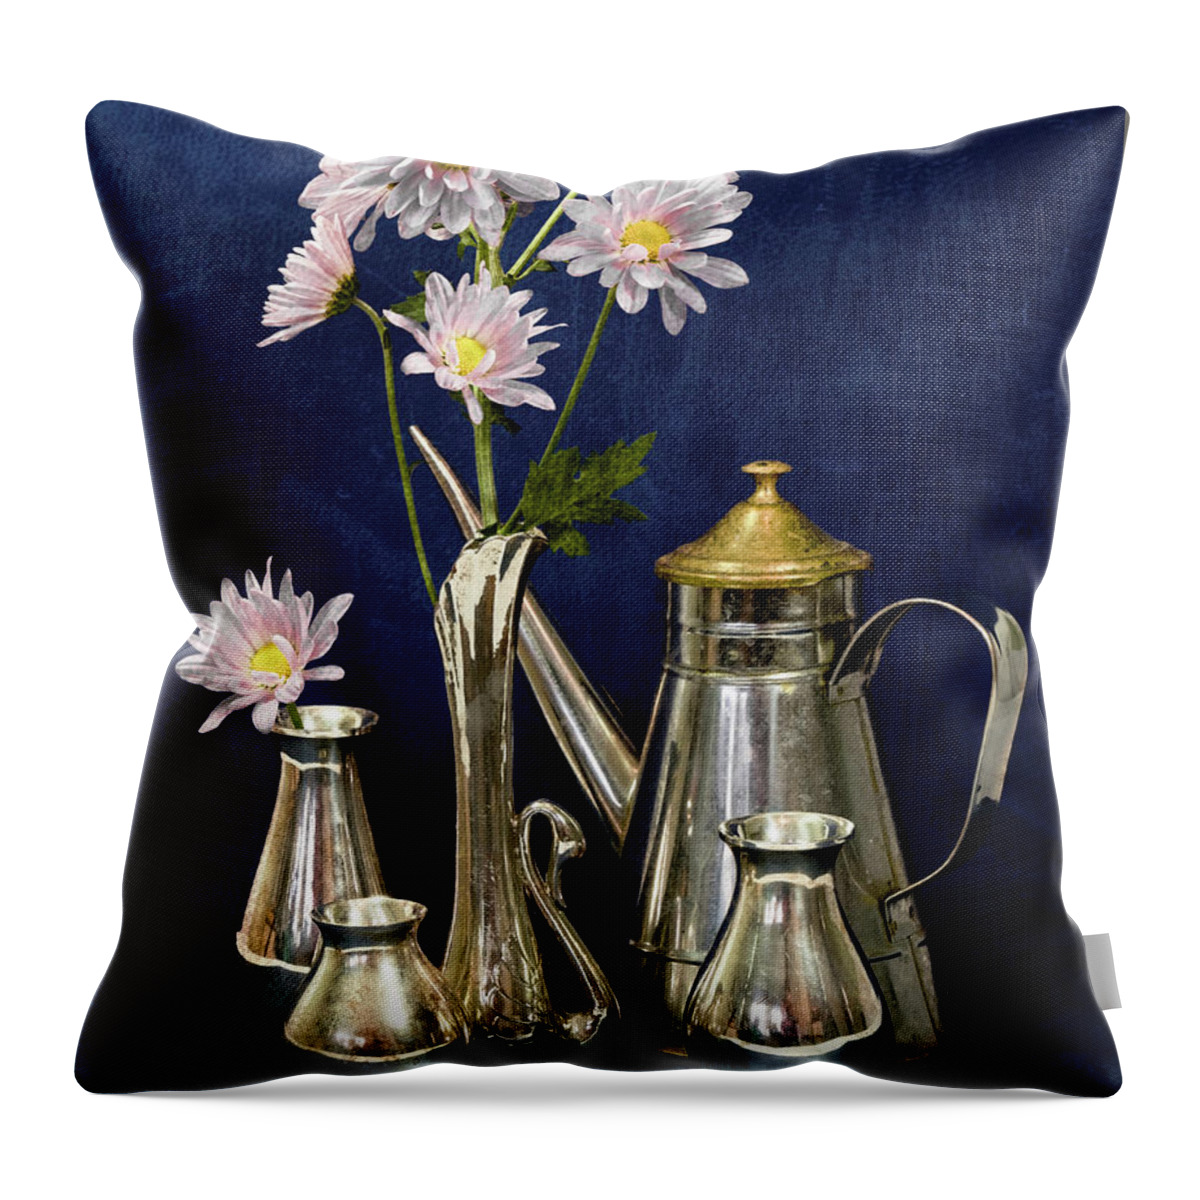 Still-life Throw Pillow featuring the photograph Daisies in Silver Still-Life by Betty Denise